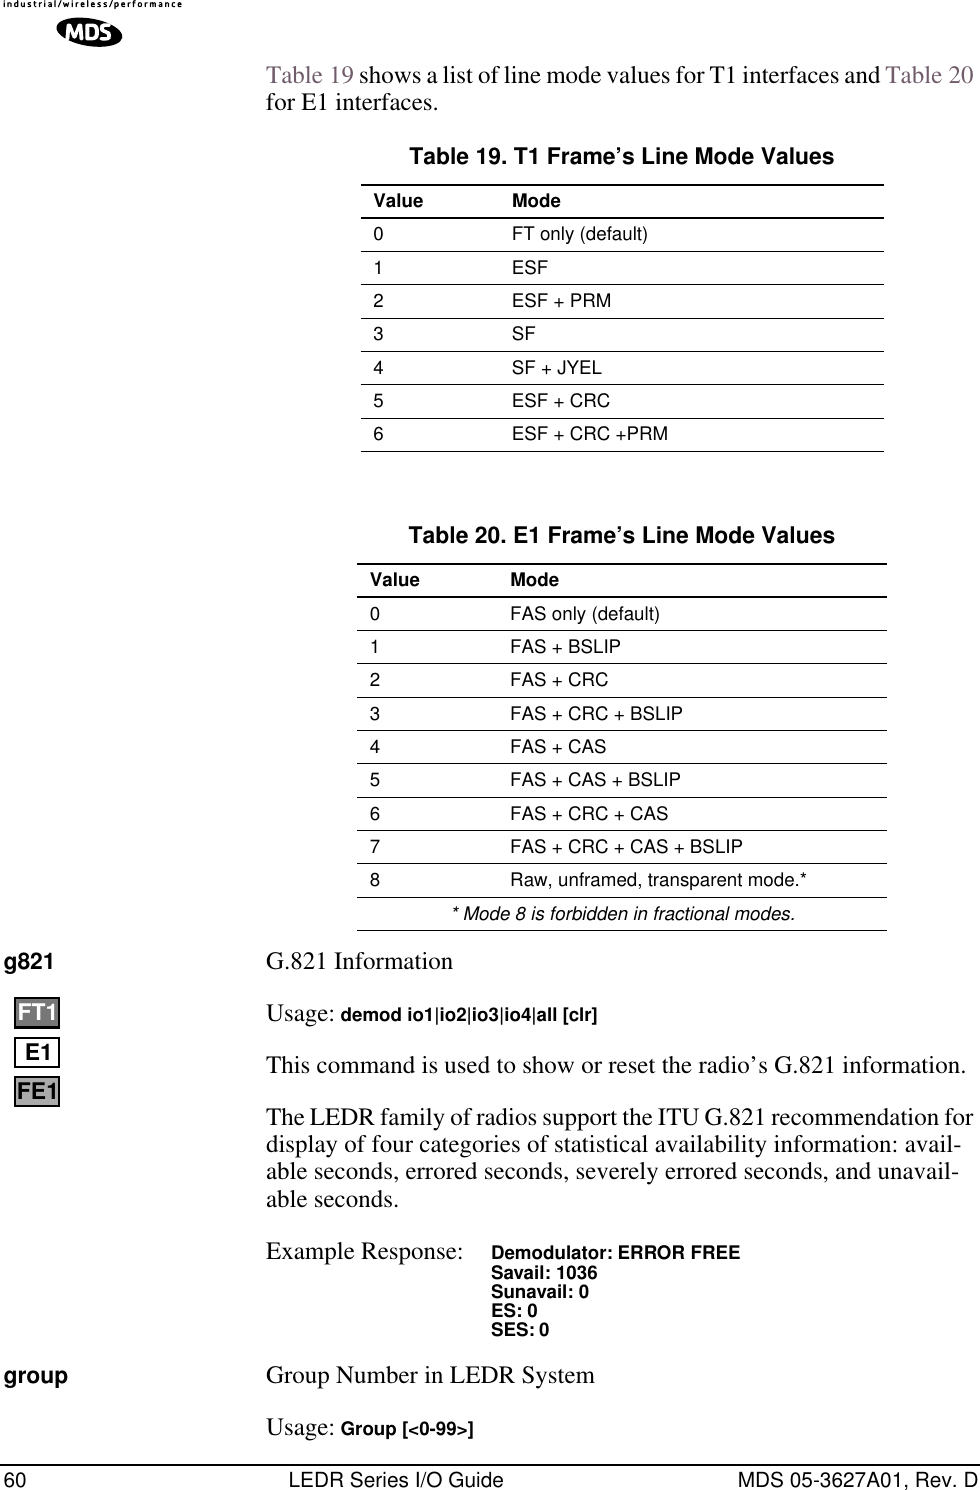 60 LEDR Series I/O Guide MDS 05-3627A01, Rev. DTable 19 shows a list of line mode values for T1 interfaces and Table 20 for E1 interfaces.    g821 G.821 Information Usage: demod io1|io2|io3|io4|all [clr]This command is used to show or reset the radio’s G.821 information. The LEDR family of radios support the ITU G.821 recommendation for display of four categories of statistical availability information: avail-able seconds, errored seconds, severely errored seconds, and unavail-able seconds. Example Response: Demodulator: ERROR FREESavail: 1036Sunavail: 0ES: 0SES: 0group Group Number in LEDR SystemUsage: Group [&lt;0-99&gt;]Table 19. T1 Frame’s Line Mode Values  Value Mode0 FT only (default)1 ESF2 ESF + PRM3SF4 SF + JYEL5 ESF + CRC6 ESF + CRC +PRMTable 20. E1 Frame’s Line Mode Values Value Mode0 FAS only (default)1 FAS + BSLIP2 FAS + CRC3 FAS + CRC + BSLIP4 FAS + CAS5 FAS + CAS + BSLIP6 FAS + CRC + CAS7 FAS + CRC + CAS + BSLIP8 Raw, unframed, transparent mode.** Mode 8 is forbidden in fractional modes.E1FT1FE1